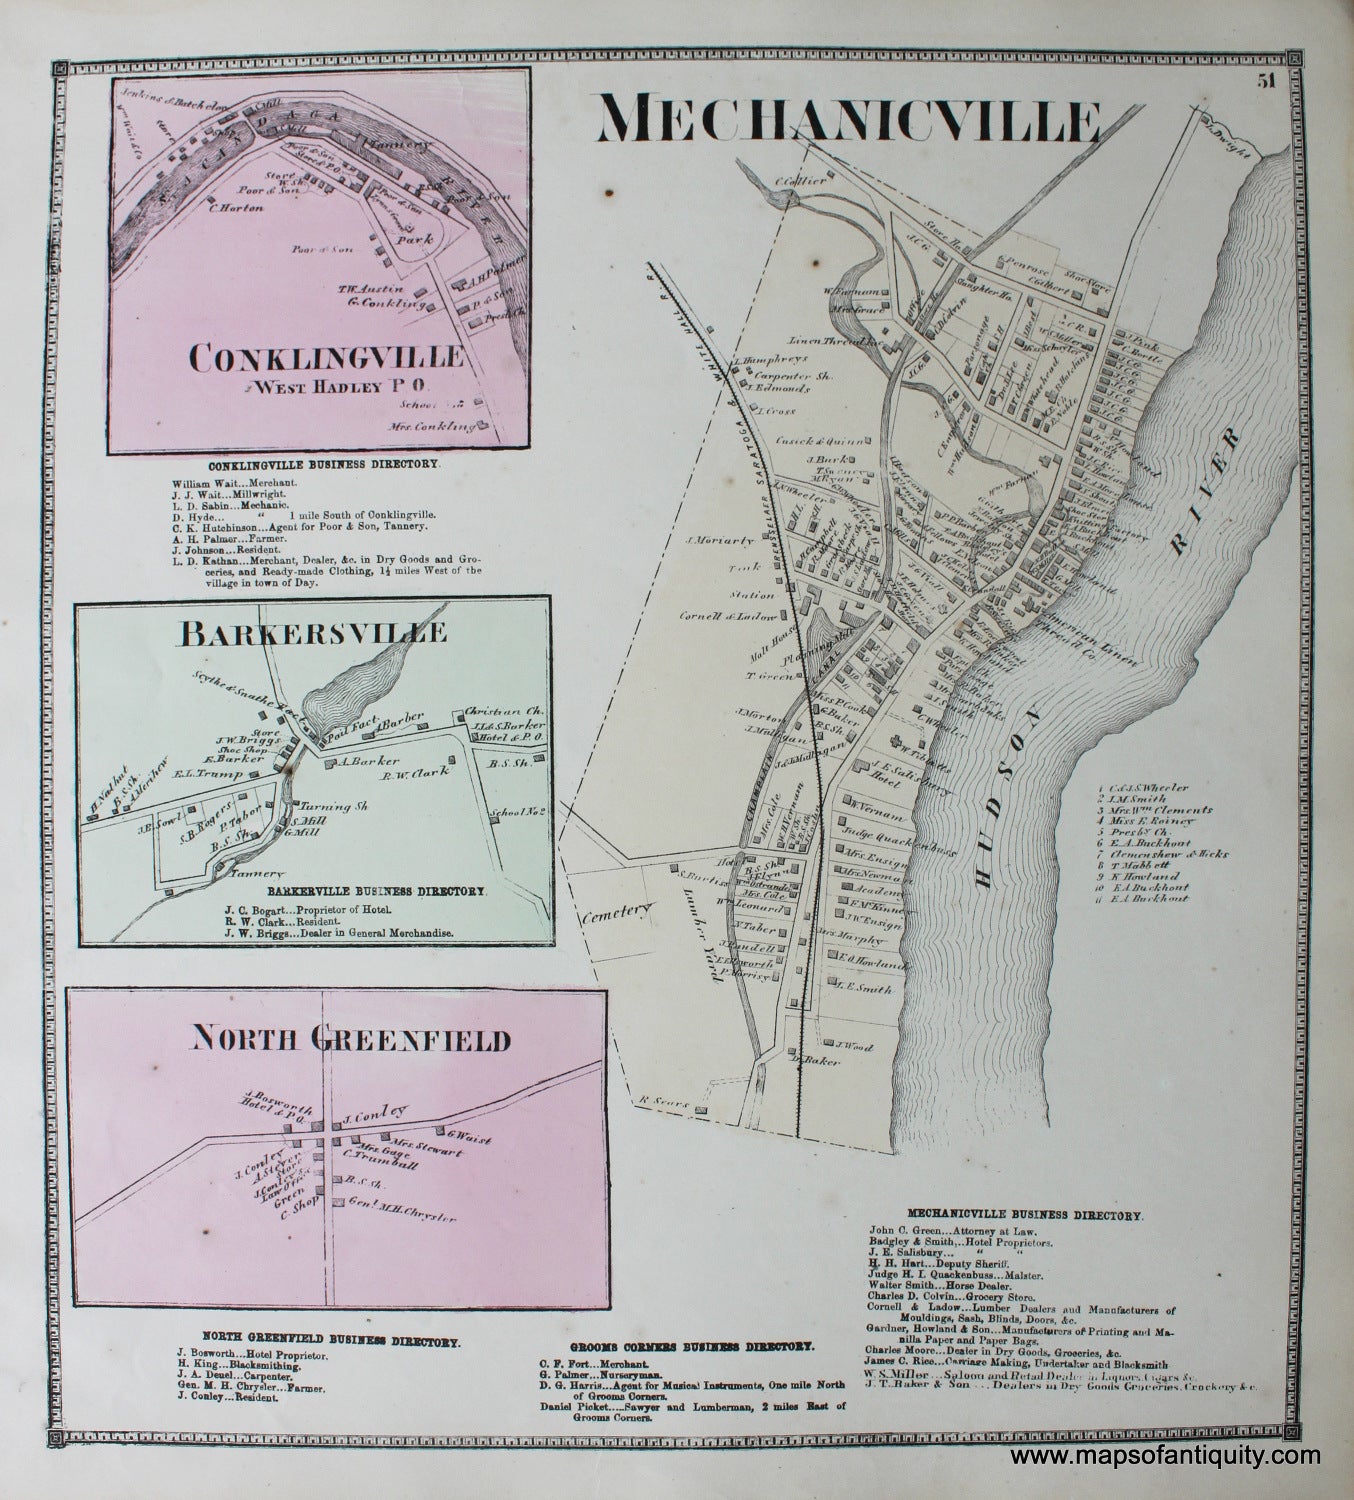 Hand-Colored-Engraved-Antique-Map-Mechanicville-Conklingville-West-Hadley-PO-Barkersville-North-Greenfield-New-York-United-States-Northeast-1866-Stone-and-Stewart-Maps-Of-Antiquity